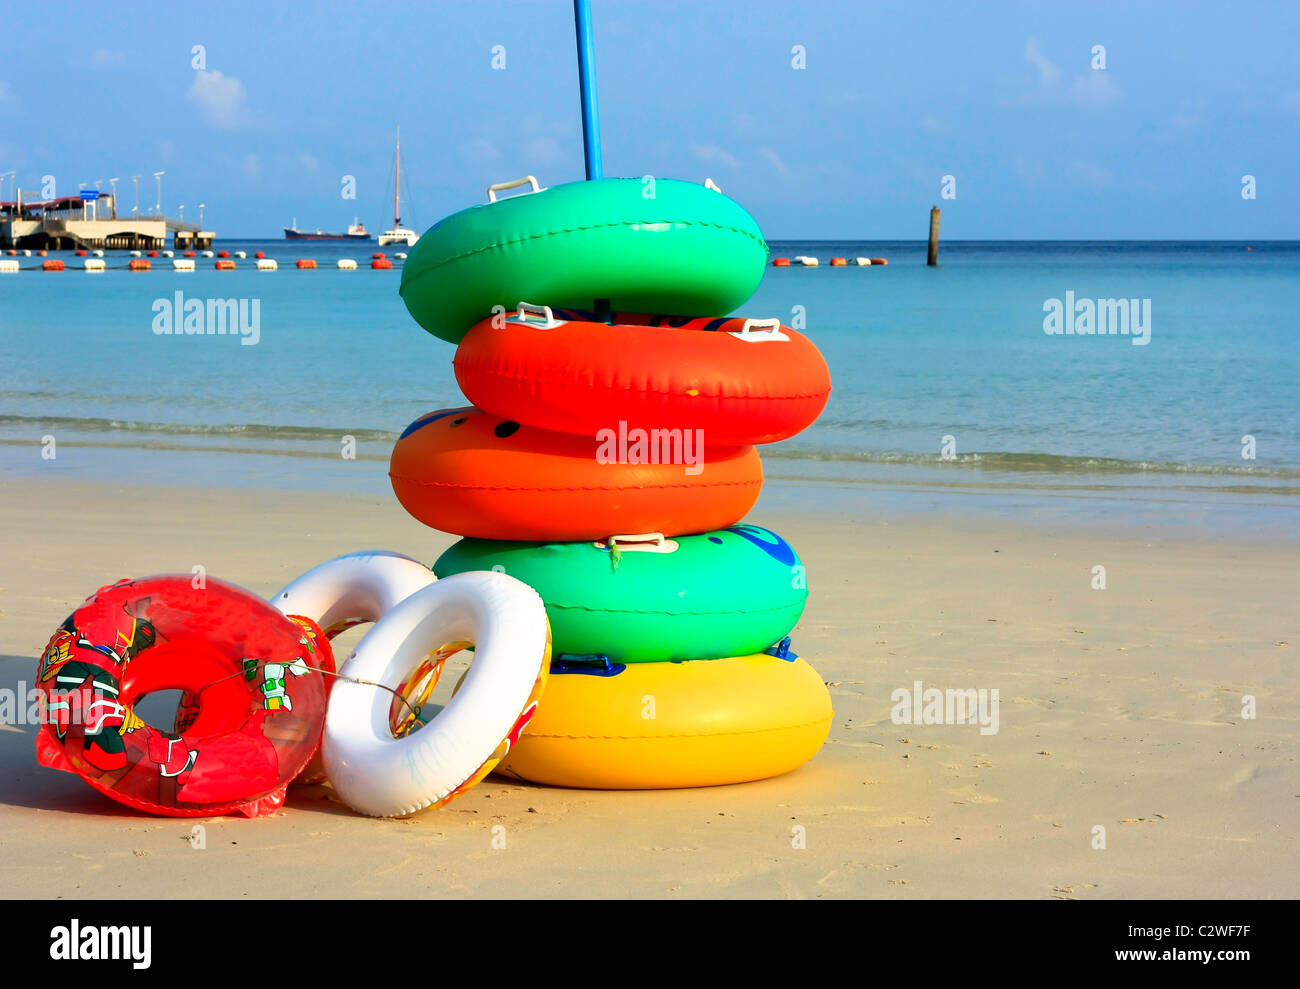 Tire network played in the sea with colorful variety of sizes to choose from. Stock Photo